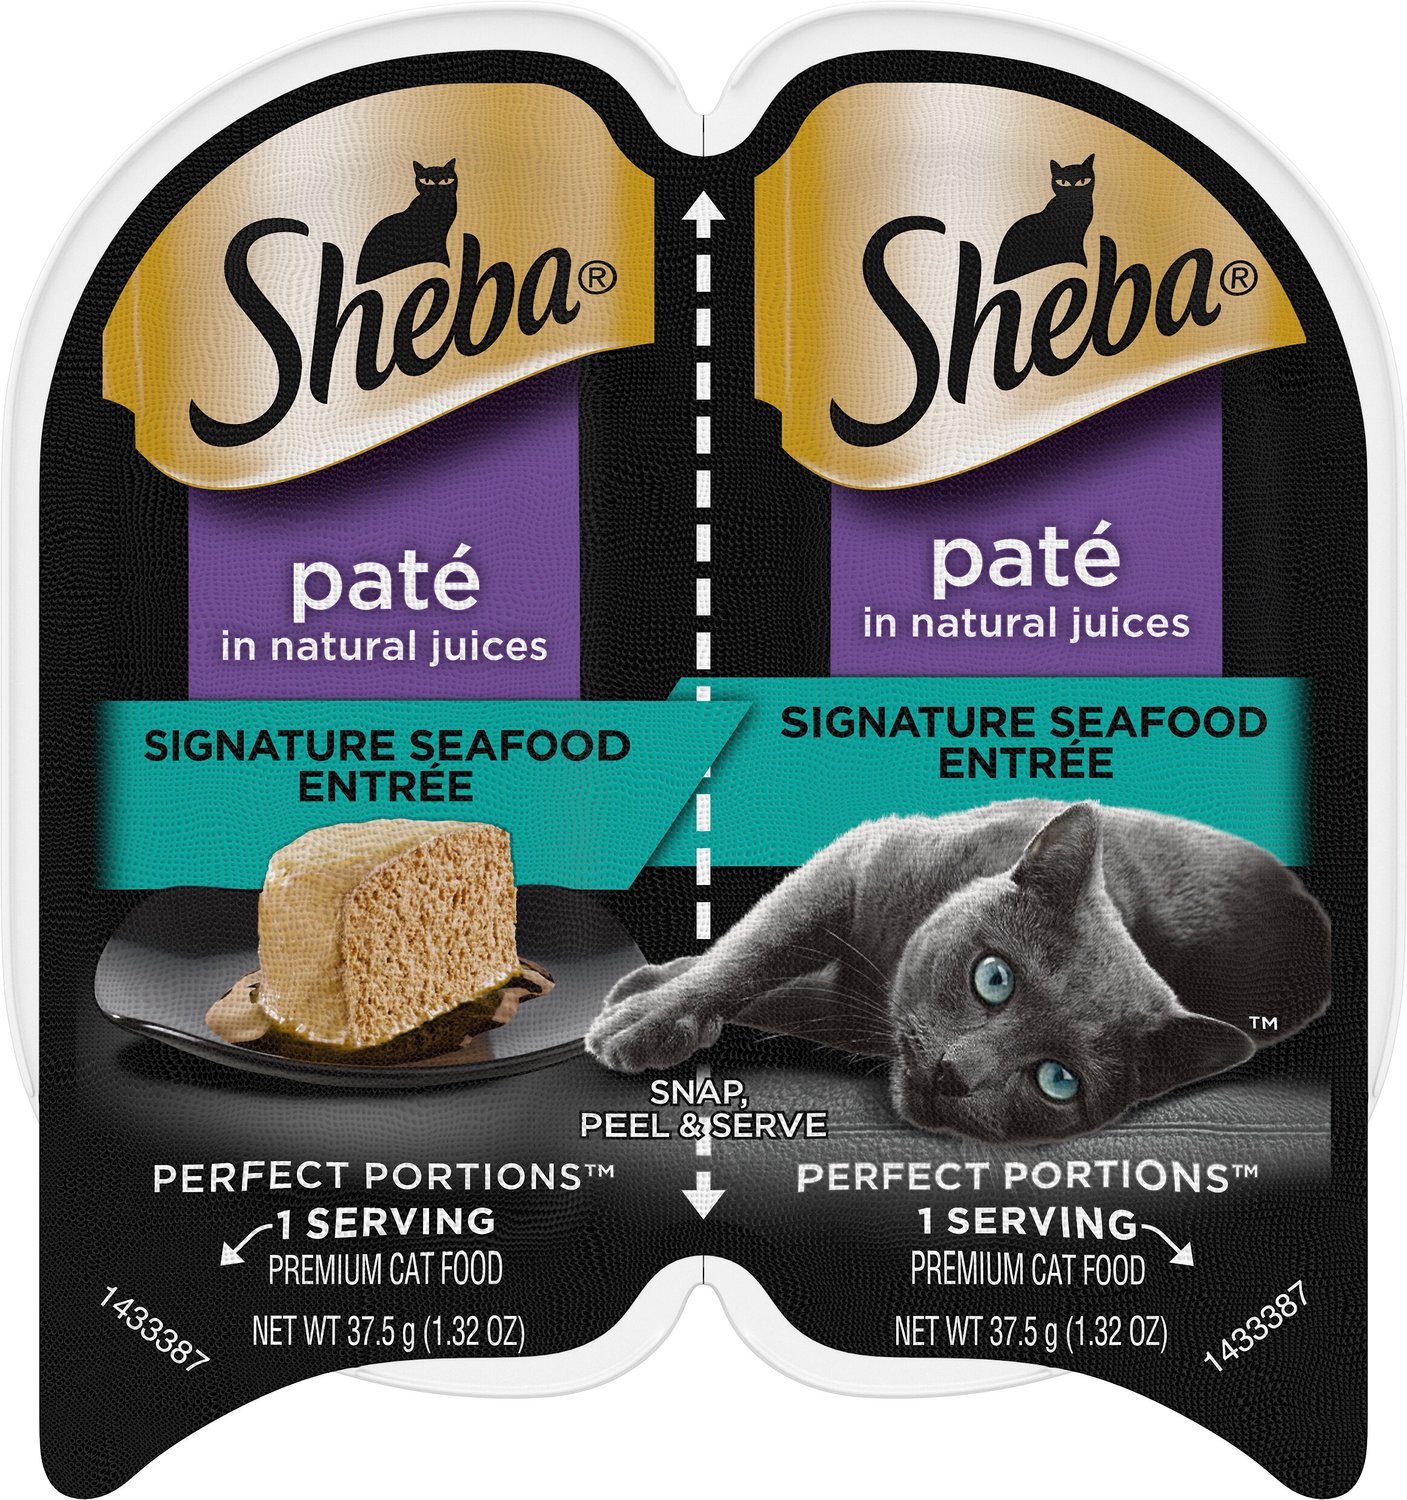 Are Sheba Cat Food Containers Recyclable? 